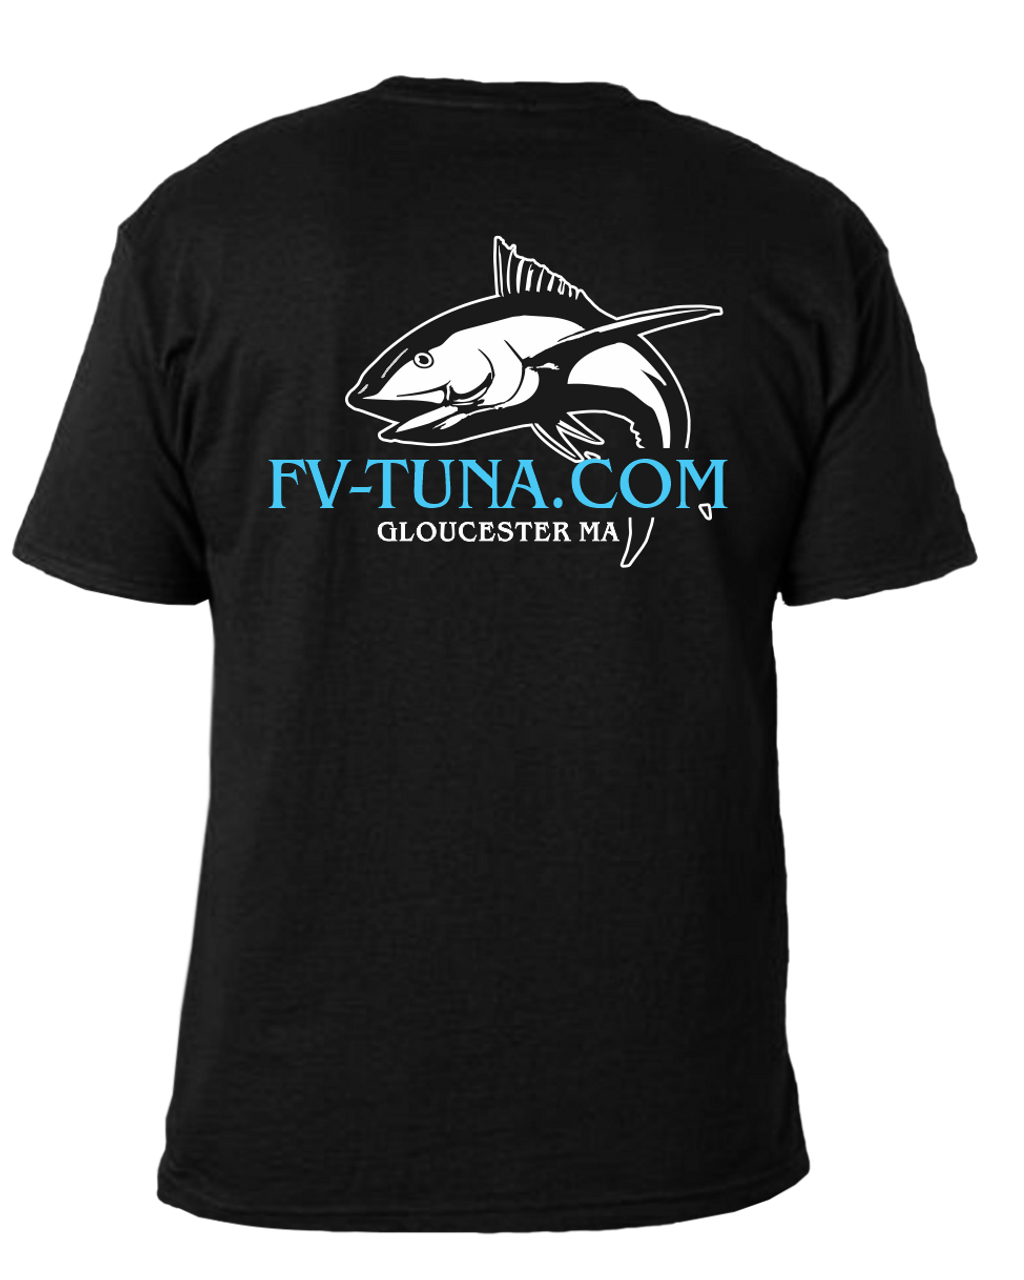 Wicked Tuna Tee Bluefin Tuna T-Shirt Let's Go Get Some Tail Fork Length Fashion